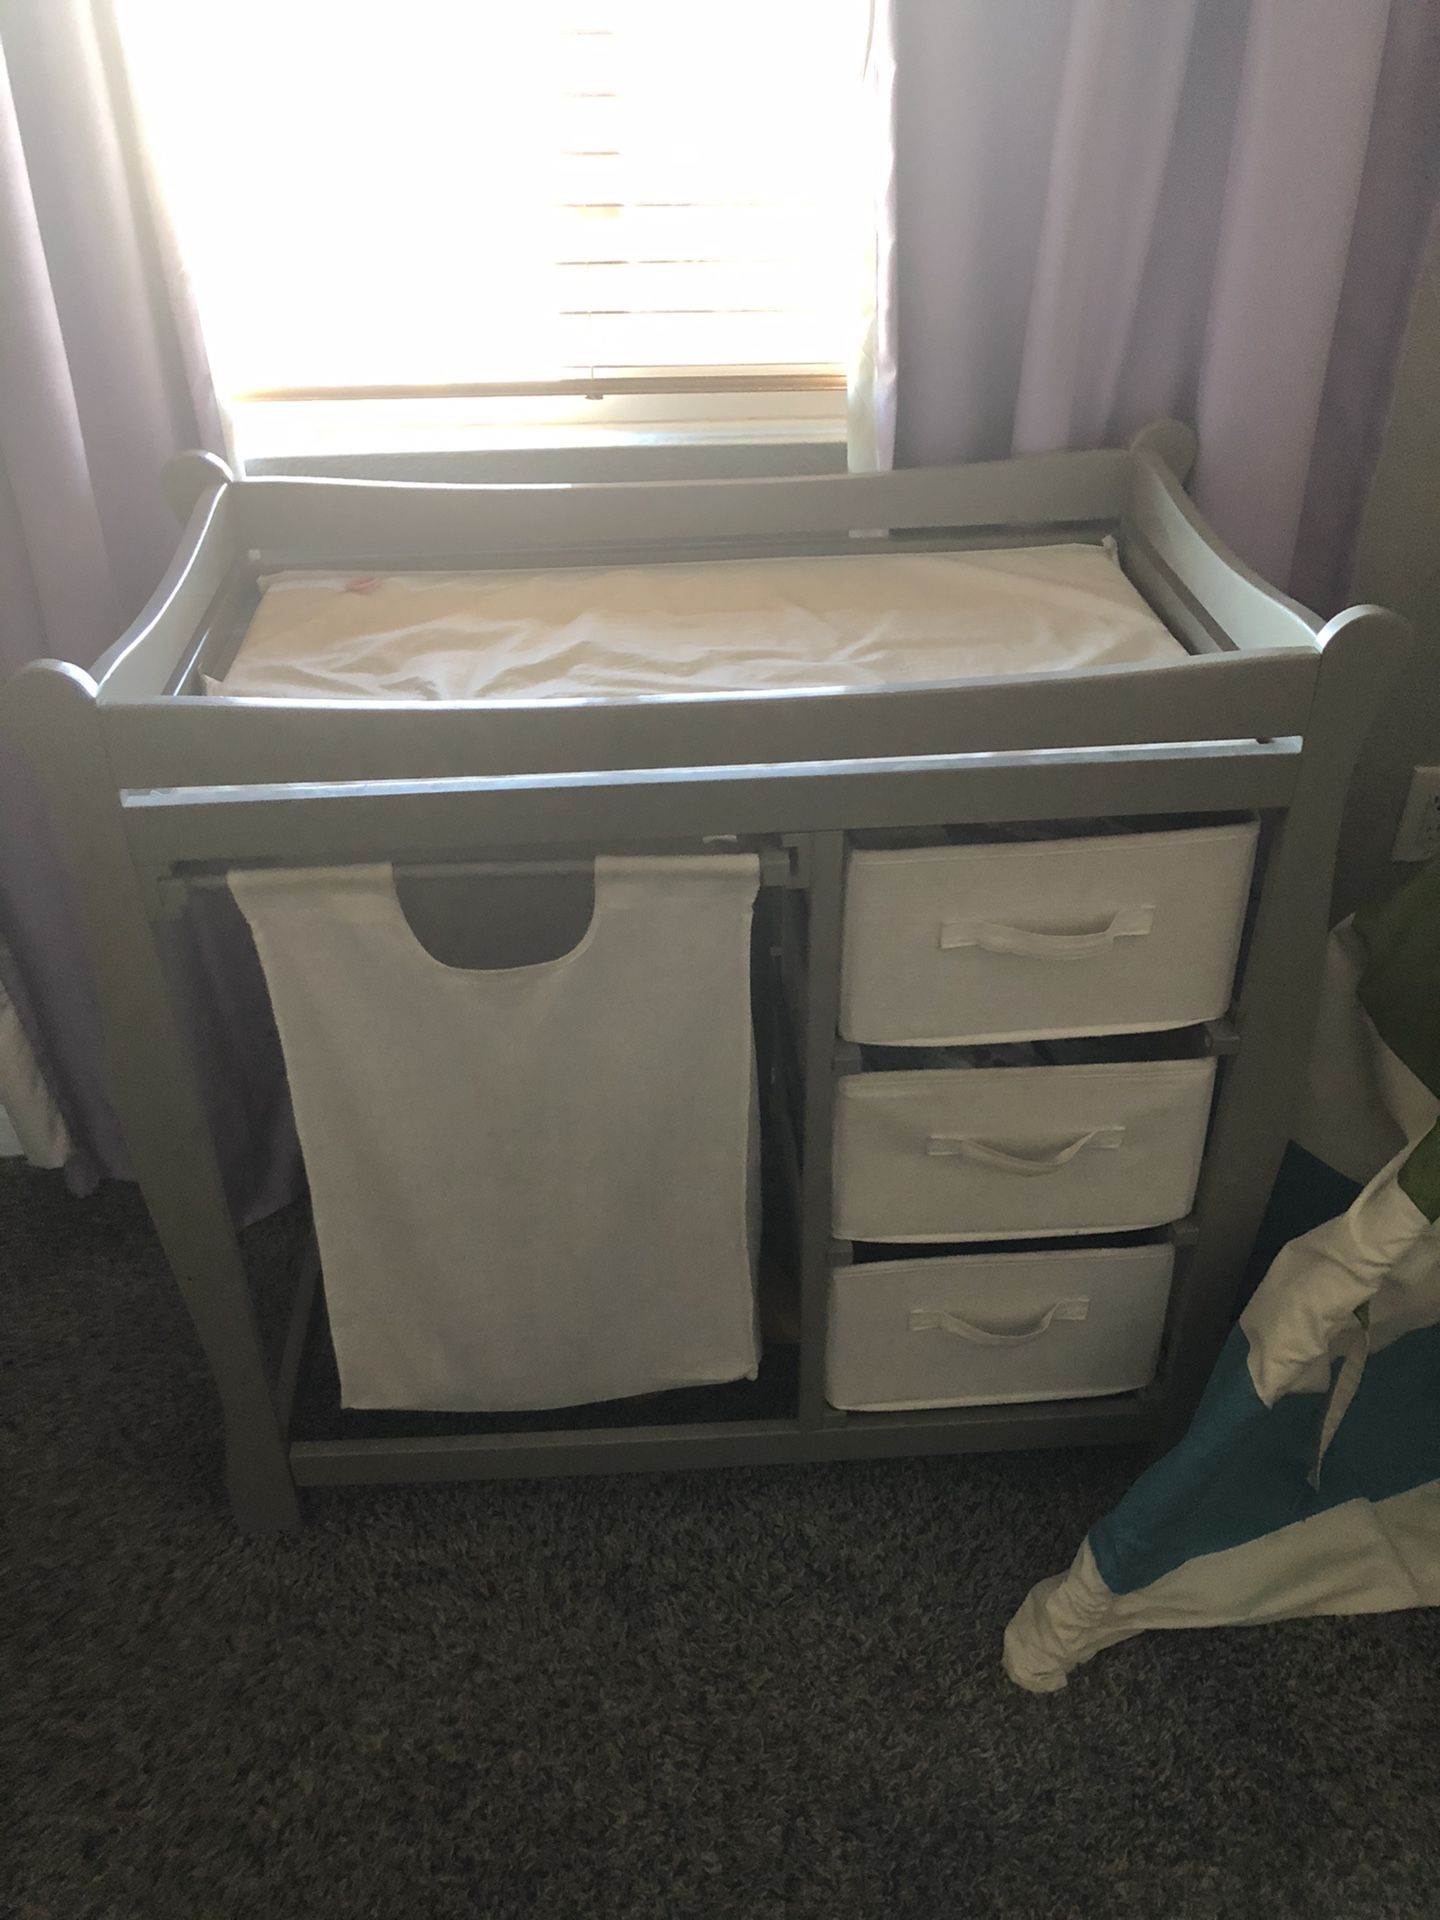 Changing table with drawers and hamper